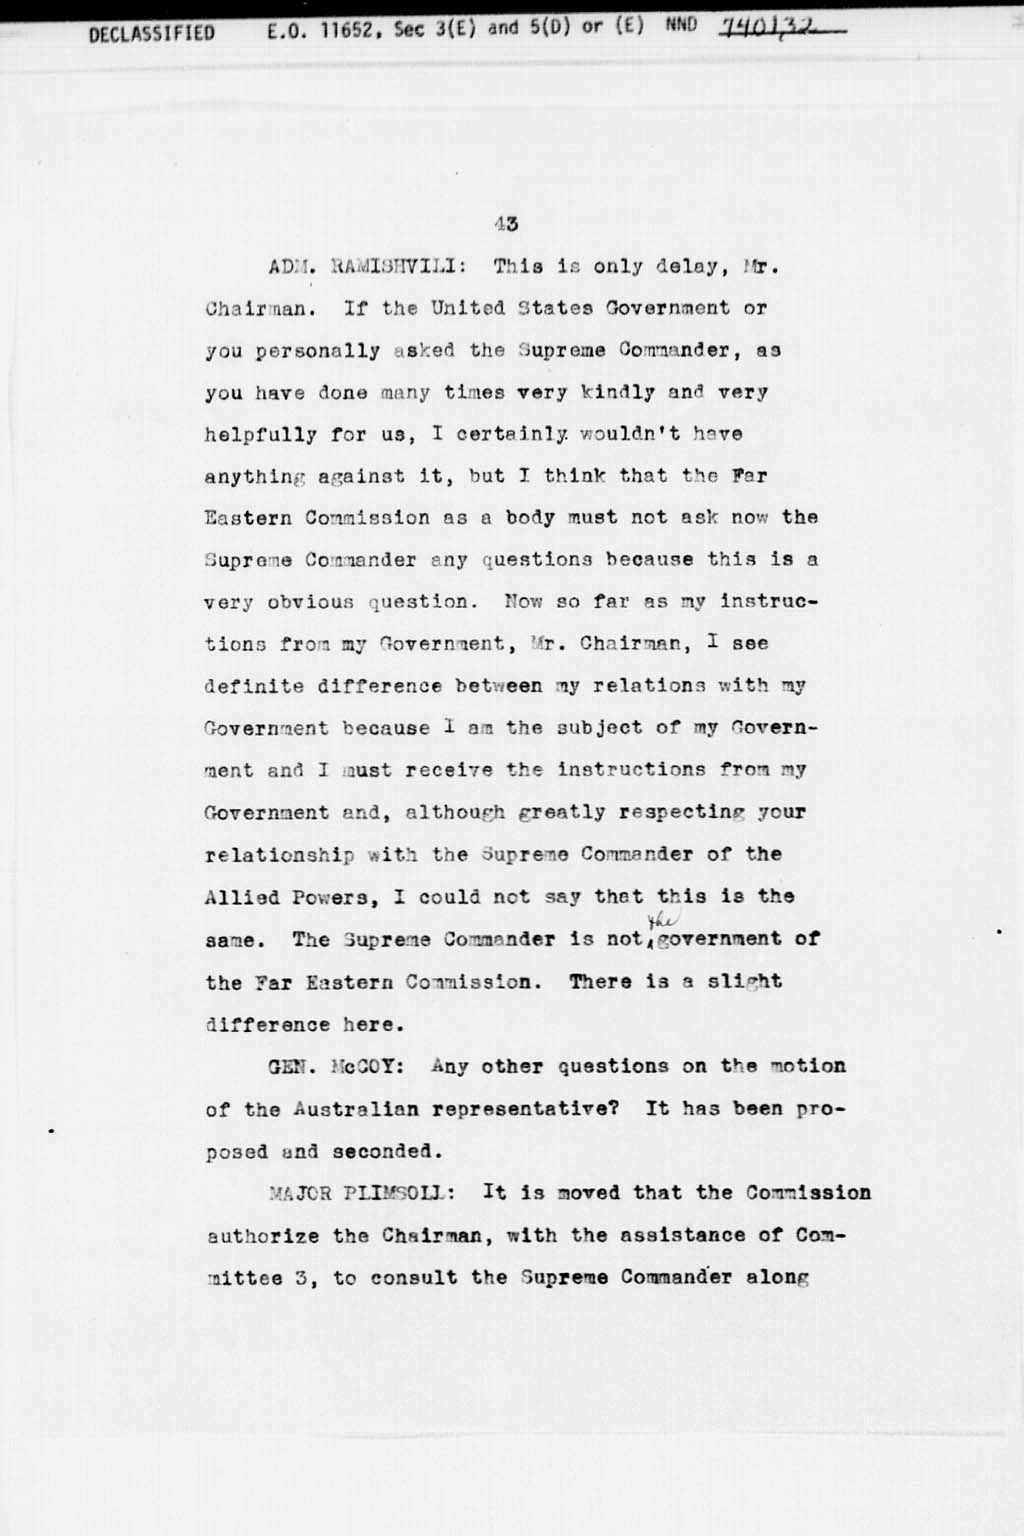 [Transcript of Twenty-Seventh Meeting of the Far Eastern Commission, Held in Main Conference Room, 2516 Massachusetts Avenue, N.W., Saturday, September 21, 1946](Larger image)